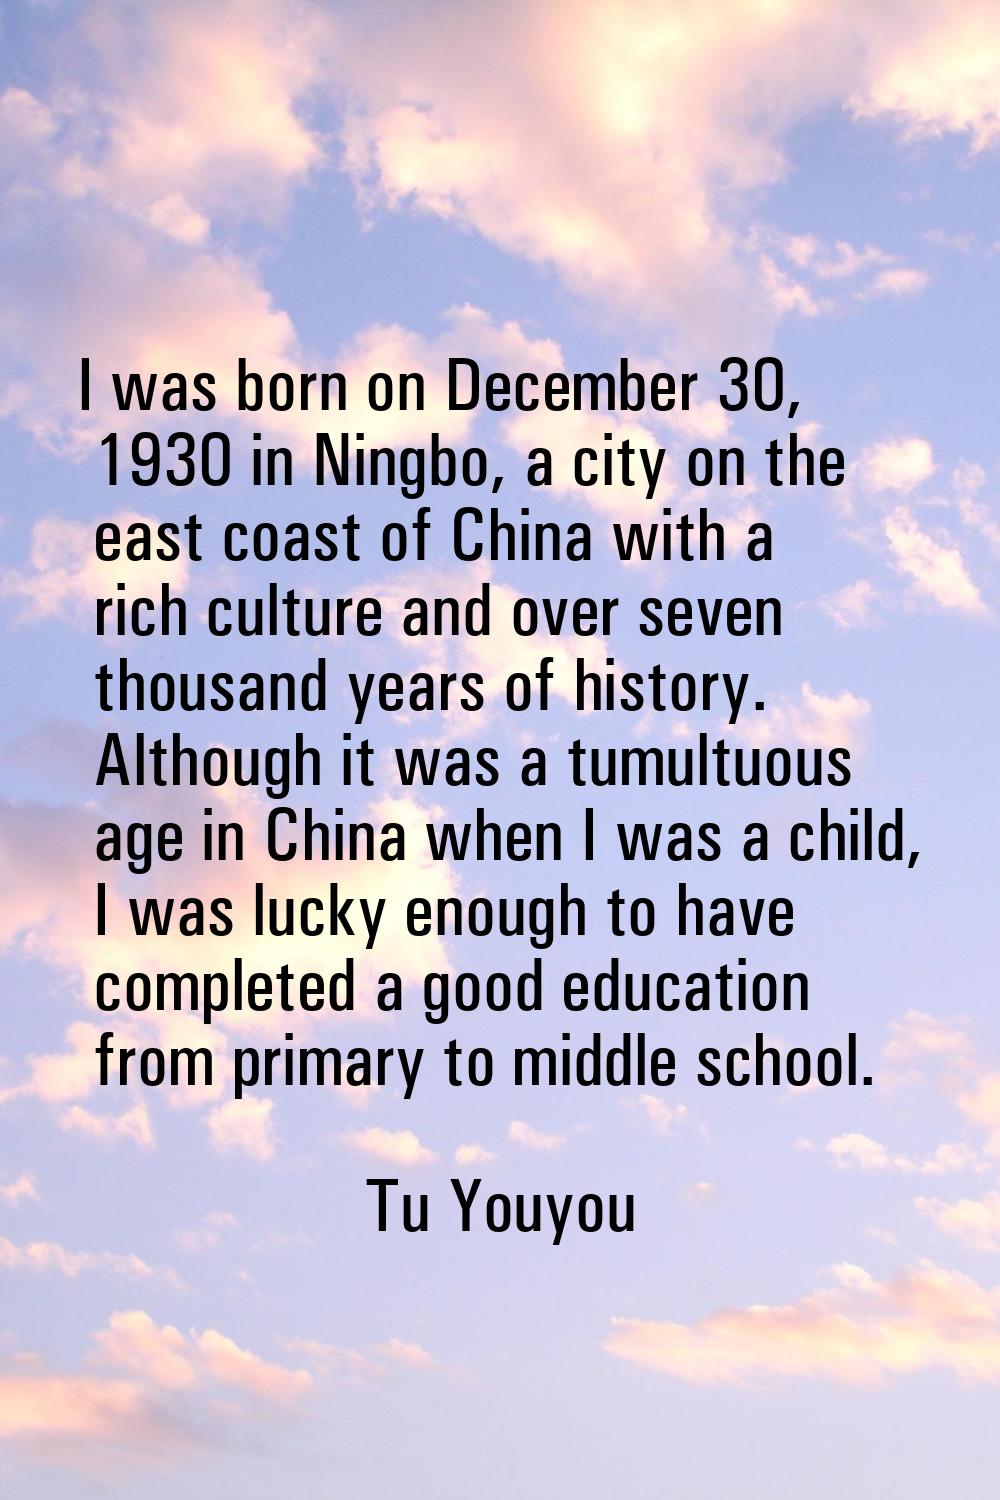 I was born on December 30, 1930 in Ningbo, a city on the east coast of China with a rich culture an